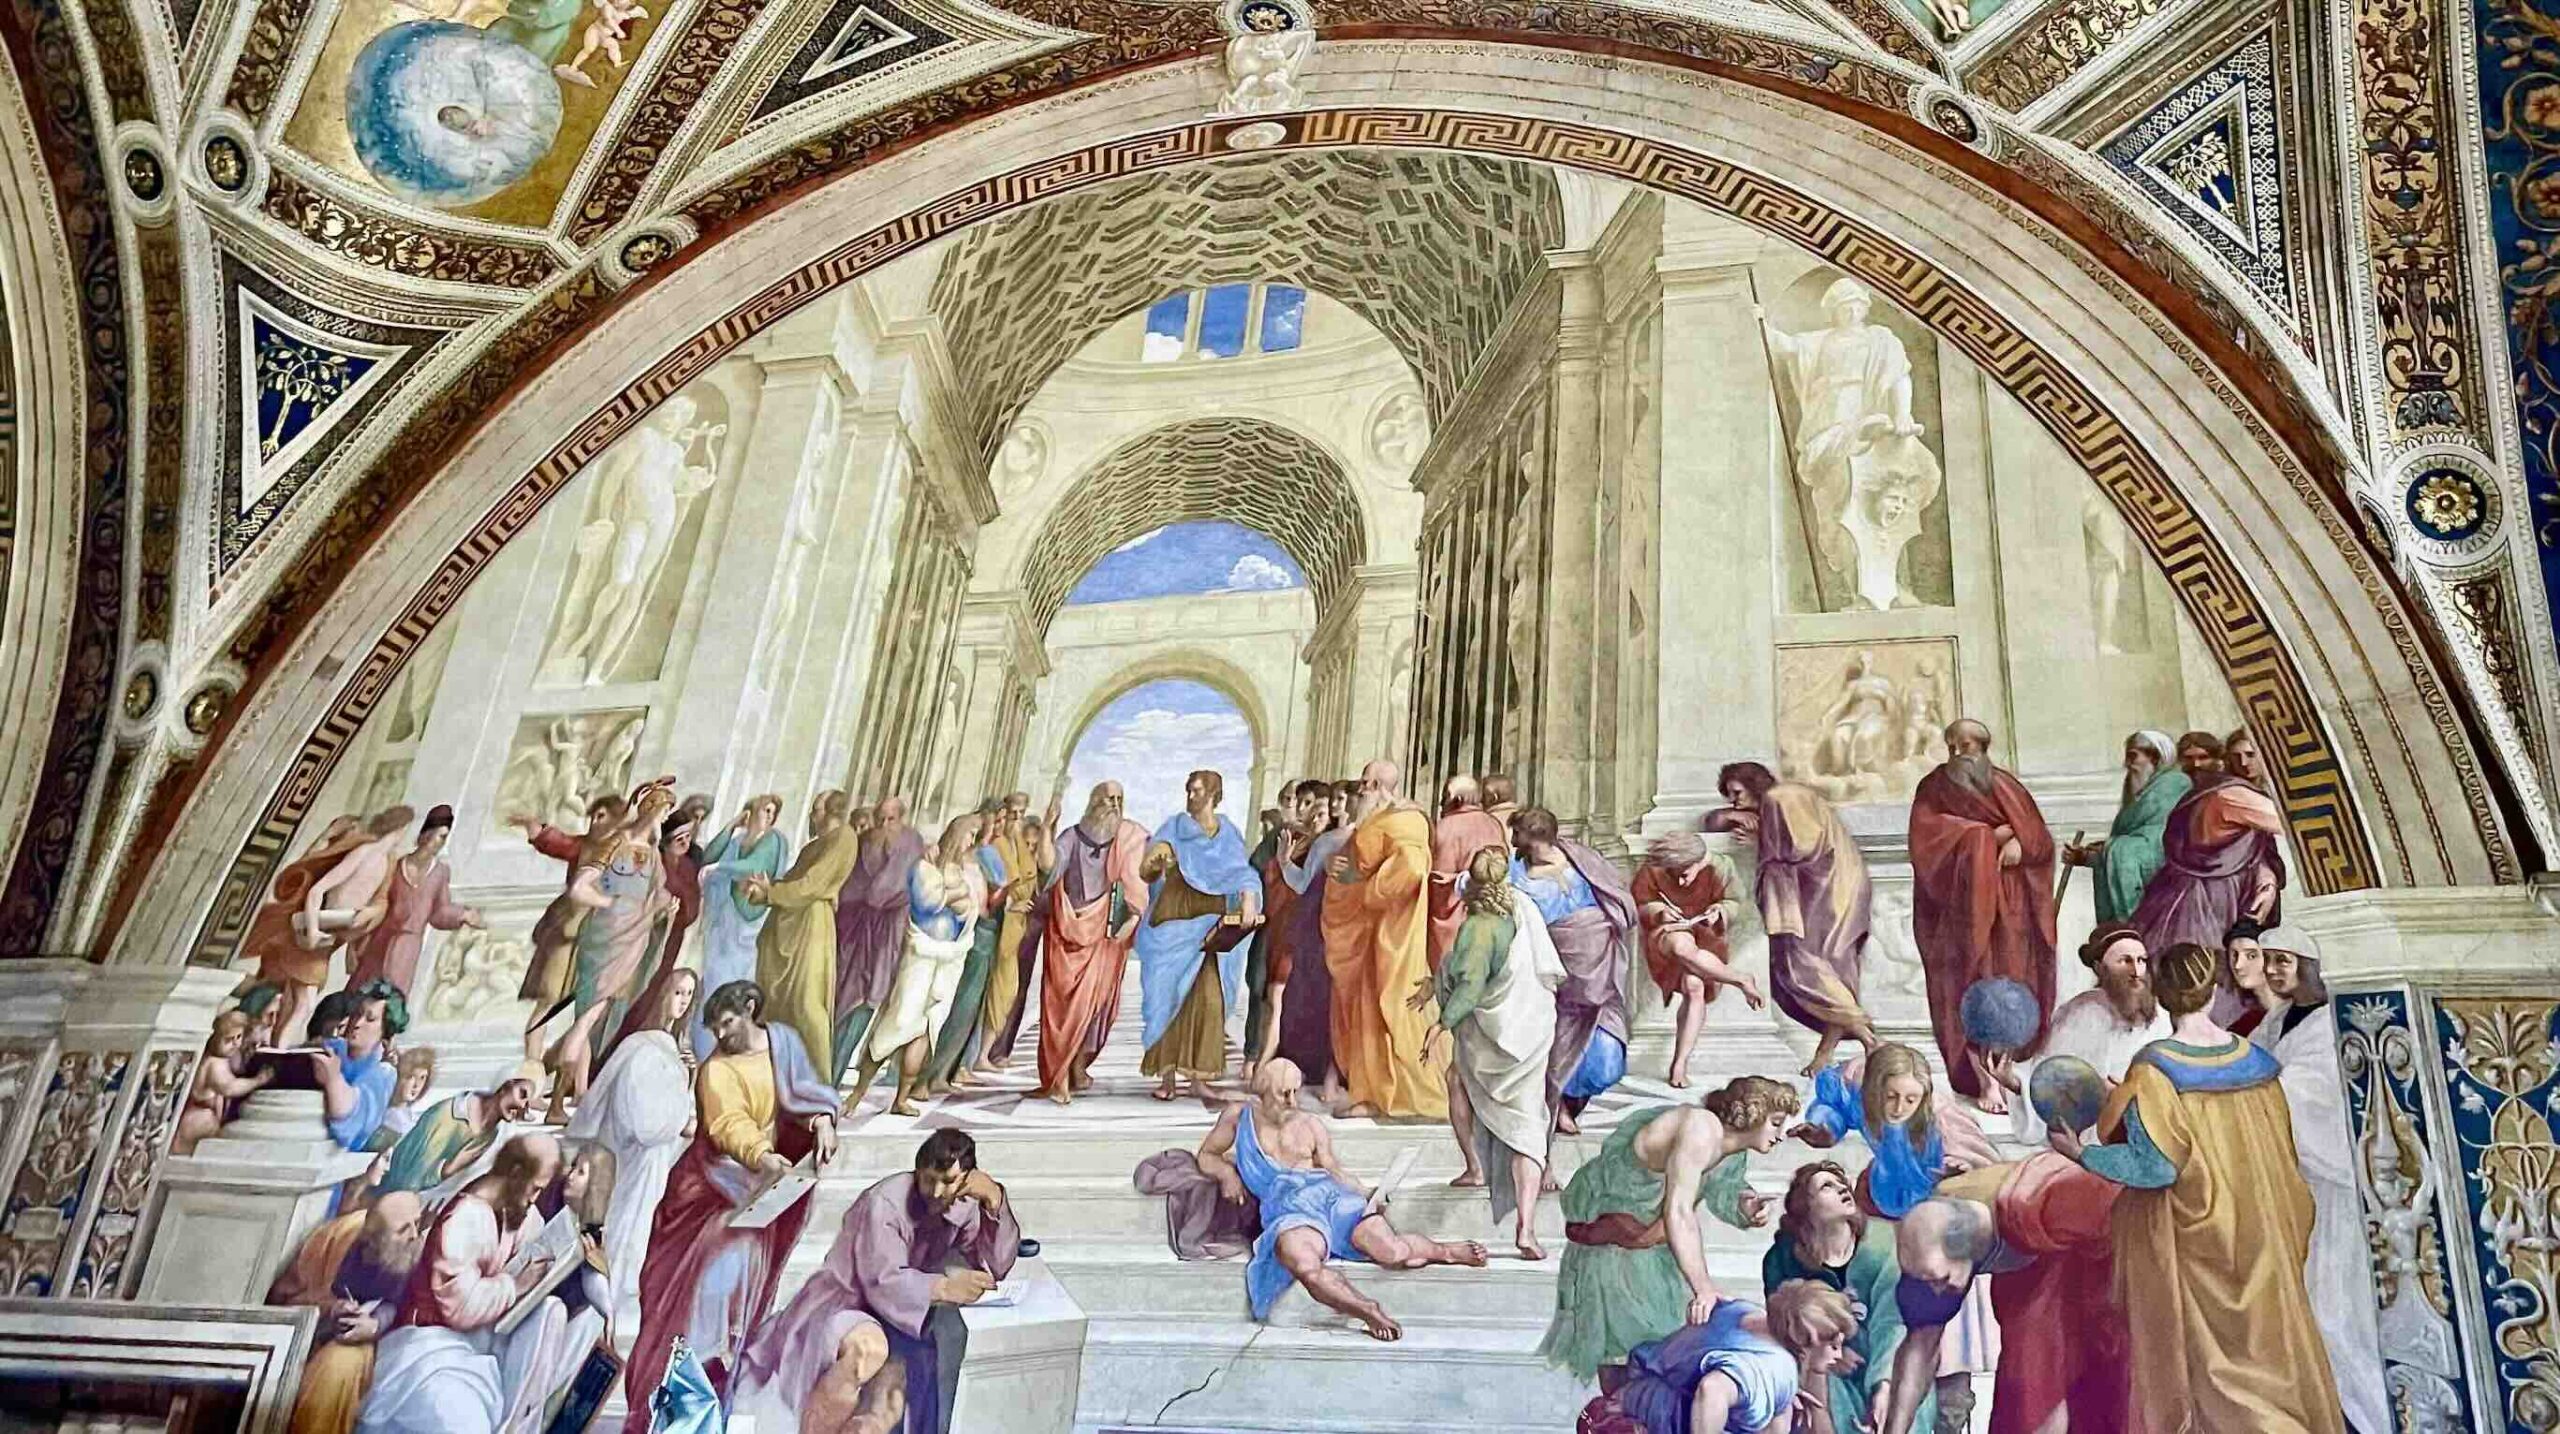 Mural at Vatican Museums Raphael Room Photo by Charlie Wagner Chazalon